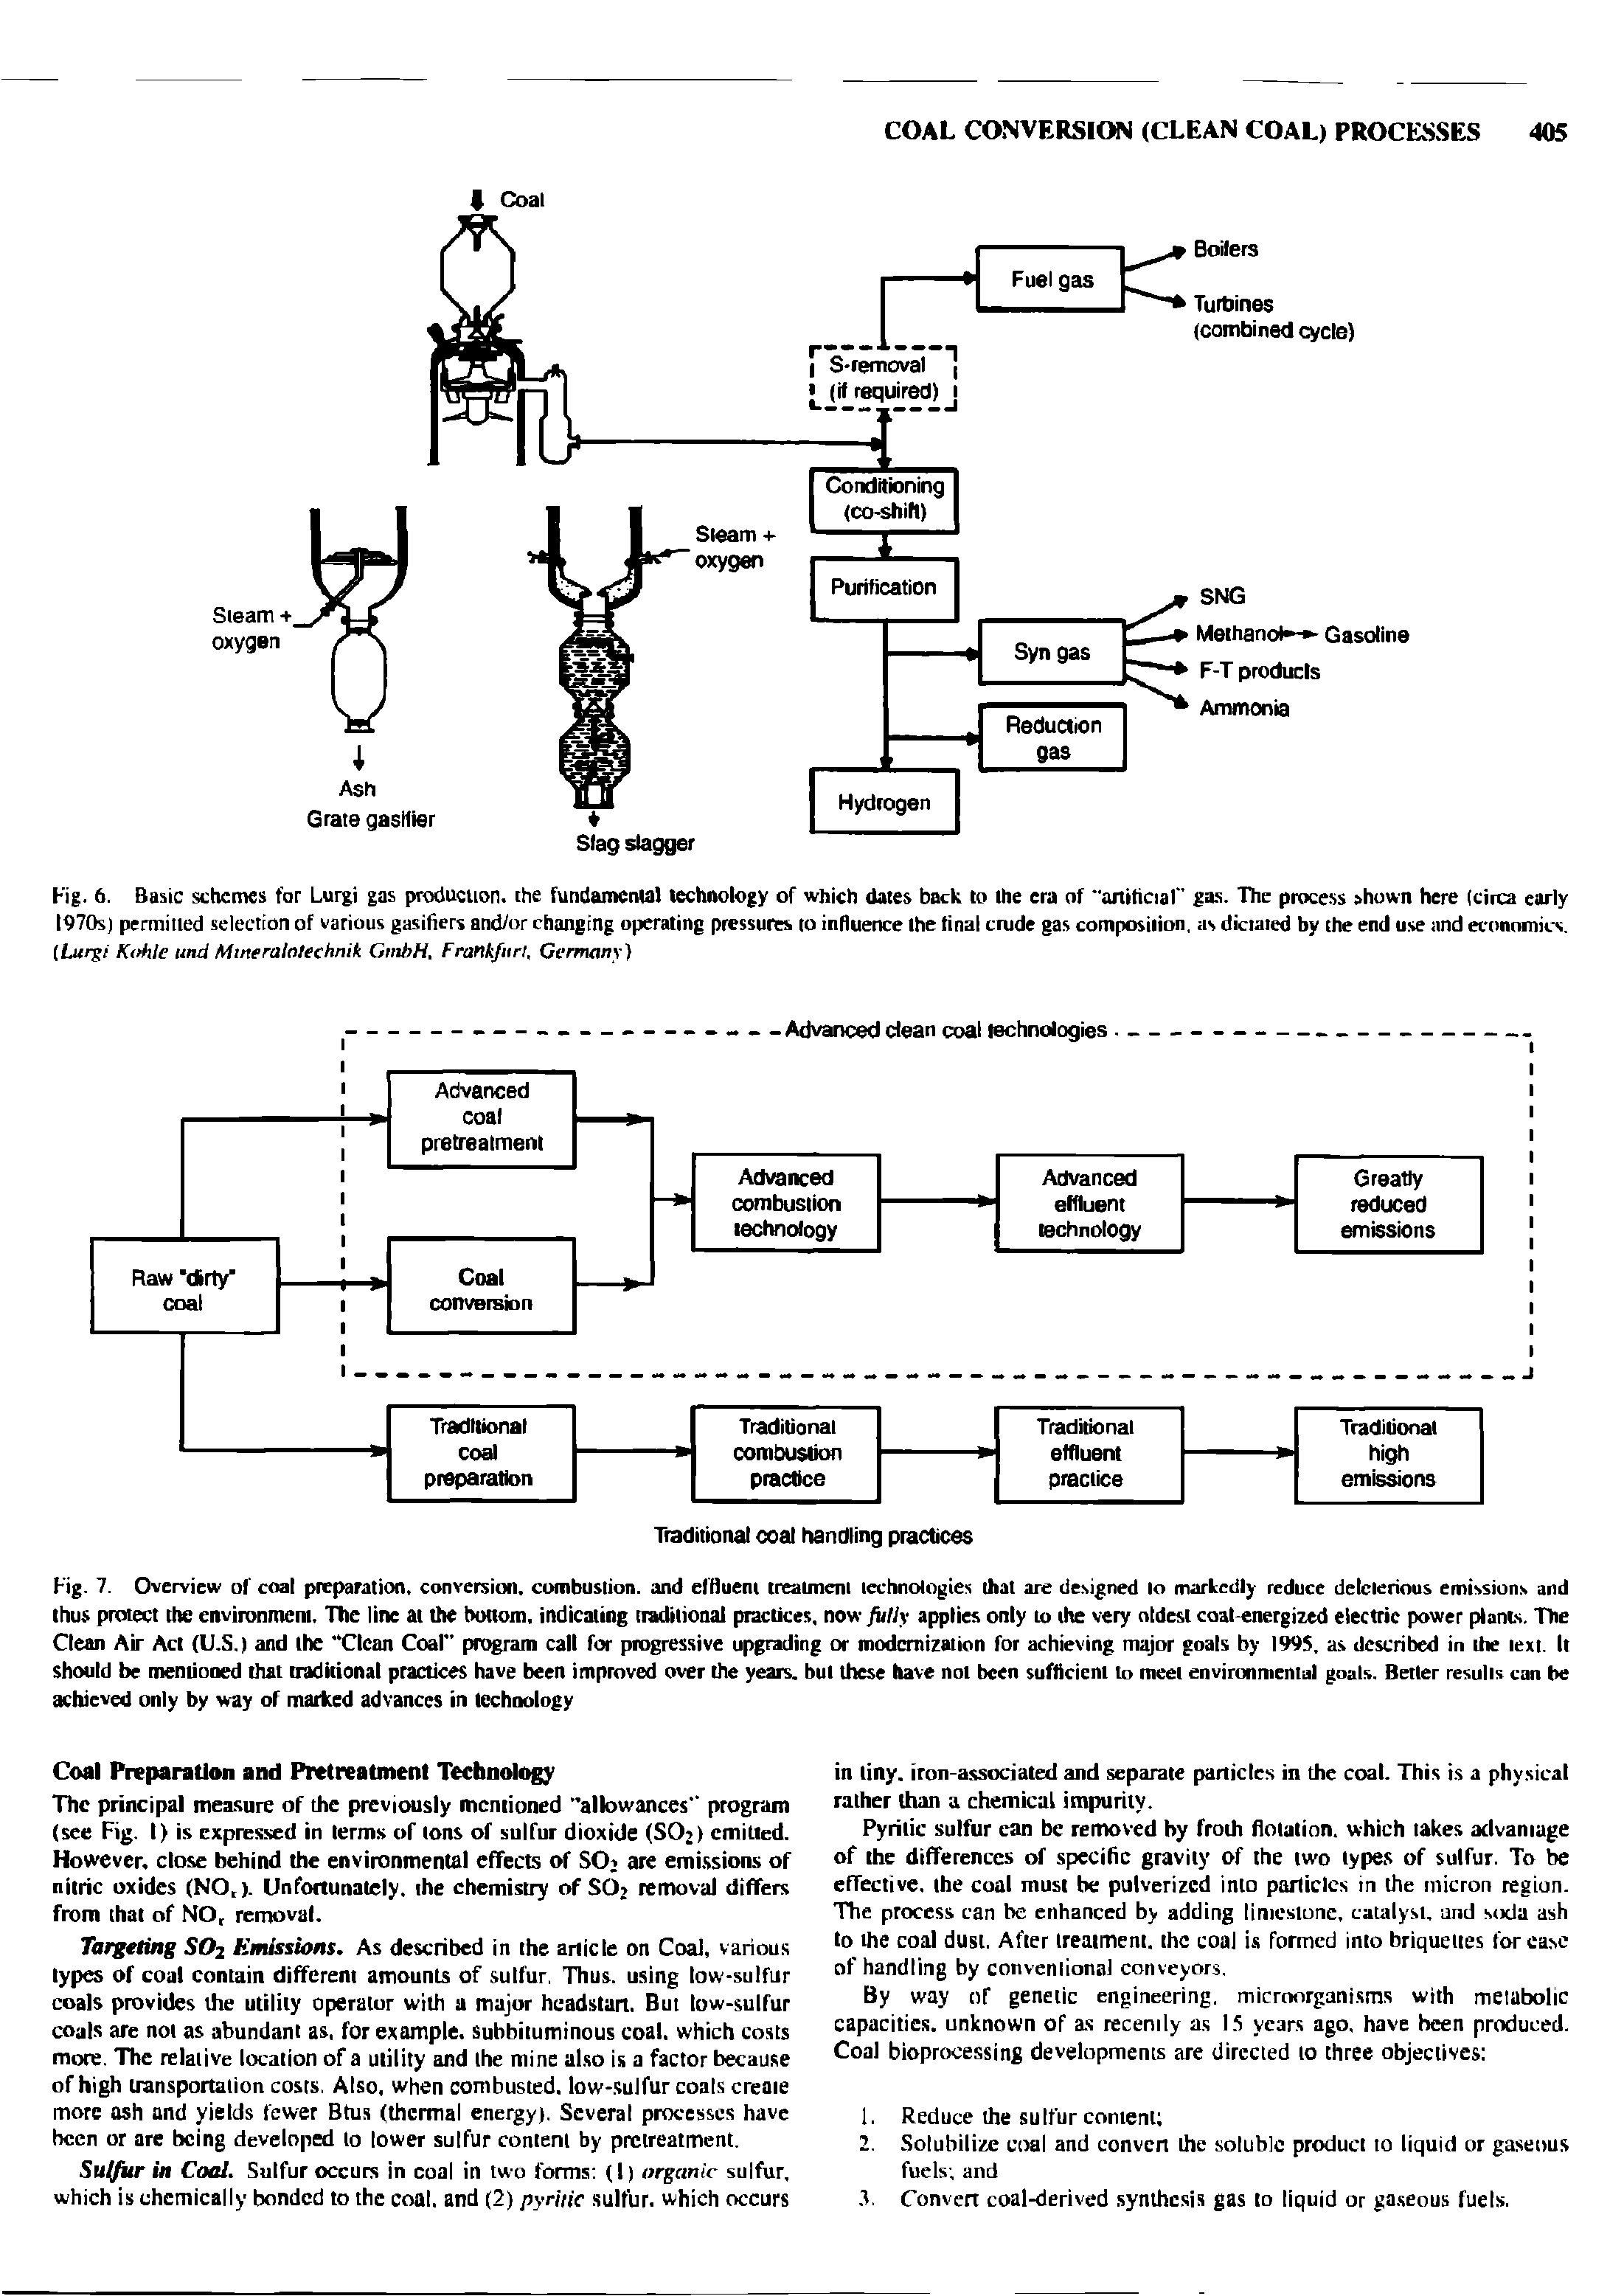 Fig. 7. Overview of coal preparation, conversion, combustion, and effluent treatment technologies that are designed to markedly reduce deleterious emissions and thus protect the environment. The line at the bottom, indicating traditional practices, now fully applies only to the very oldest coat-energized electric power plants. The Clean Air Act (U.S.) and the Clean Coal program call for progressive upgrading or modernization for achieving major goals by 1995. as described in the text. It should be mentioned that traditional practices have been improved over the years, but these have not been sufficient to meet environmental goals. Better results can be achieved only by way of marked advances in technology...